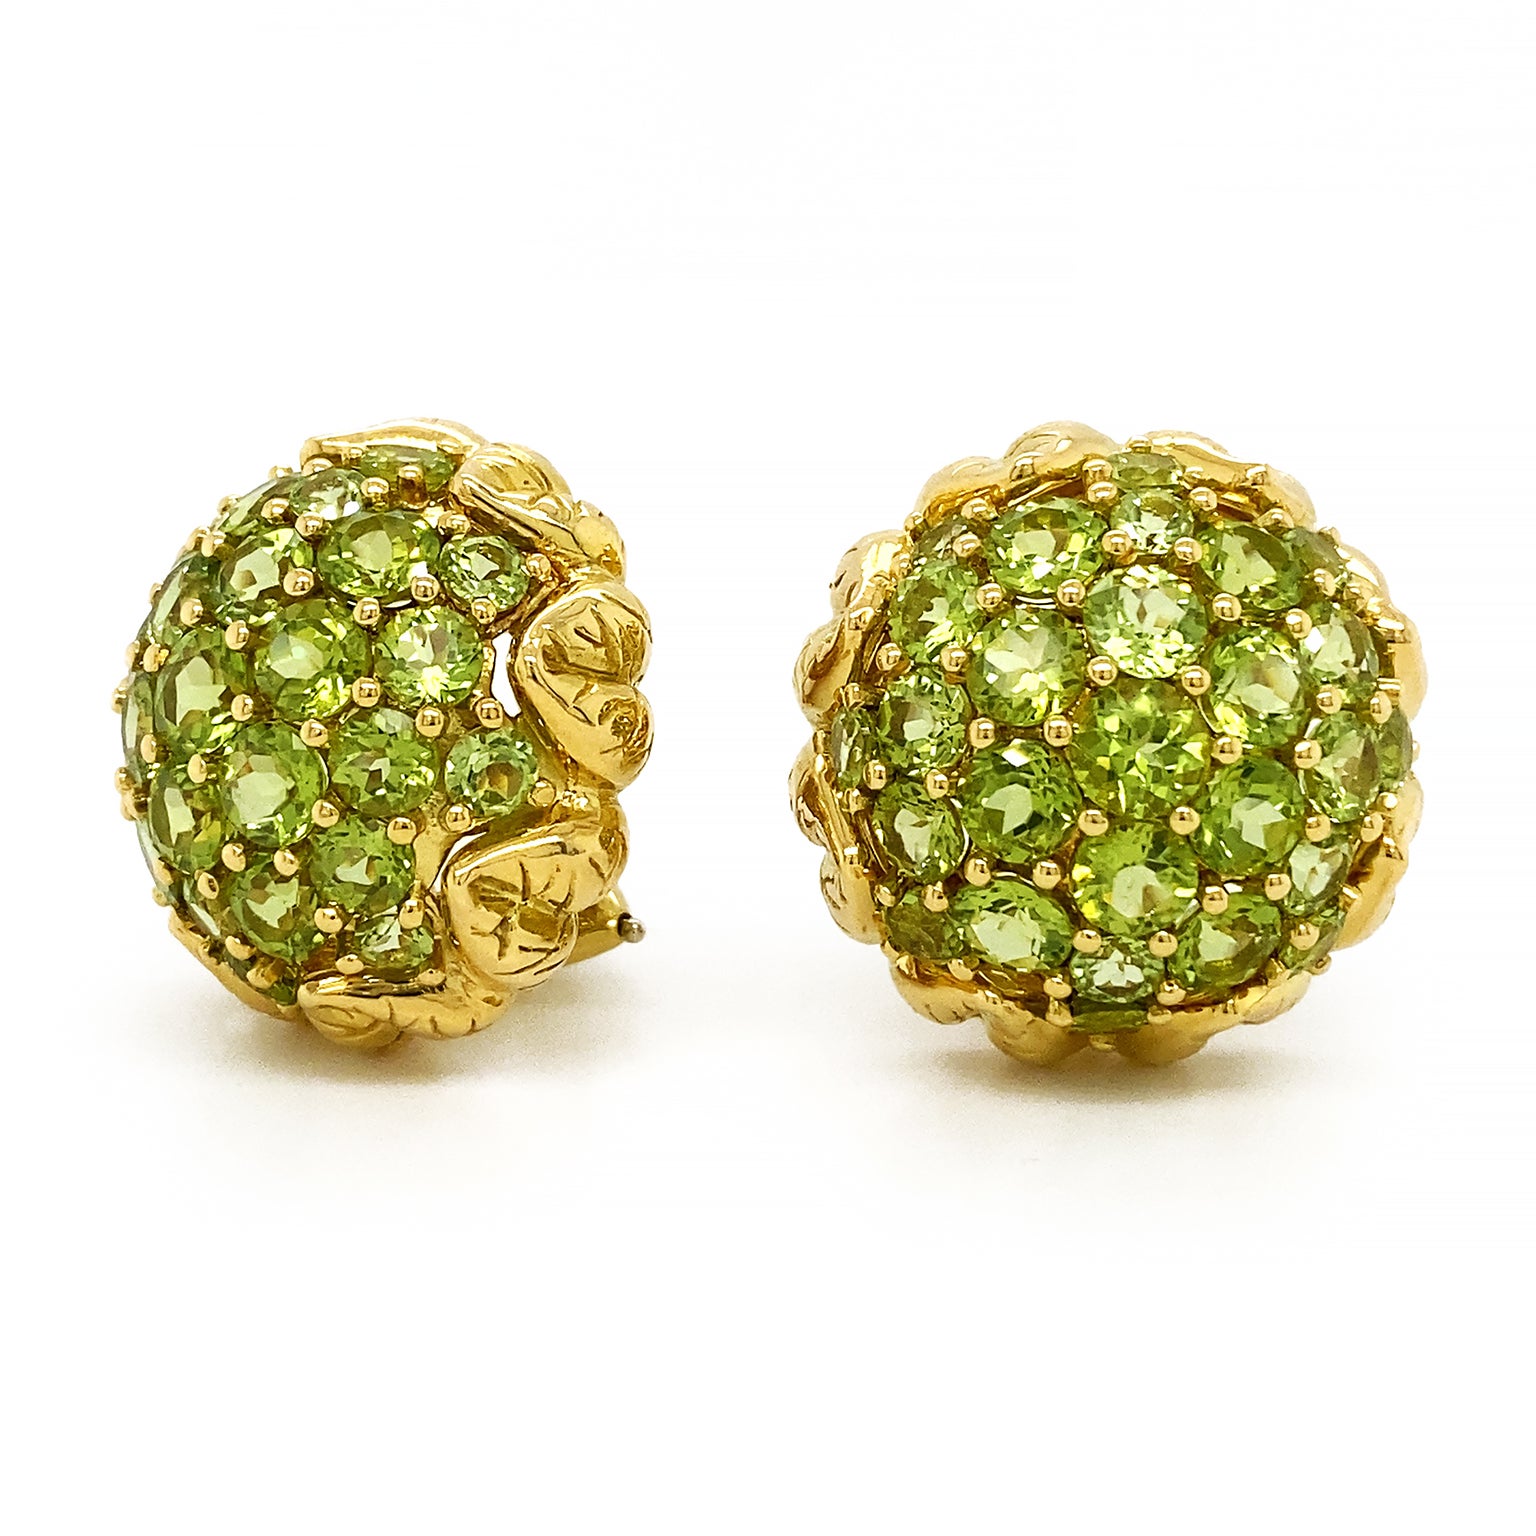 Jewels and gold illustrate a flower bud soon to blossom. The heart of these earrings is a cluster of pave set peridots glistening in every direction as the light falls upon them. 18k yellow gold furnishes textured petals surrounding the jewels,